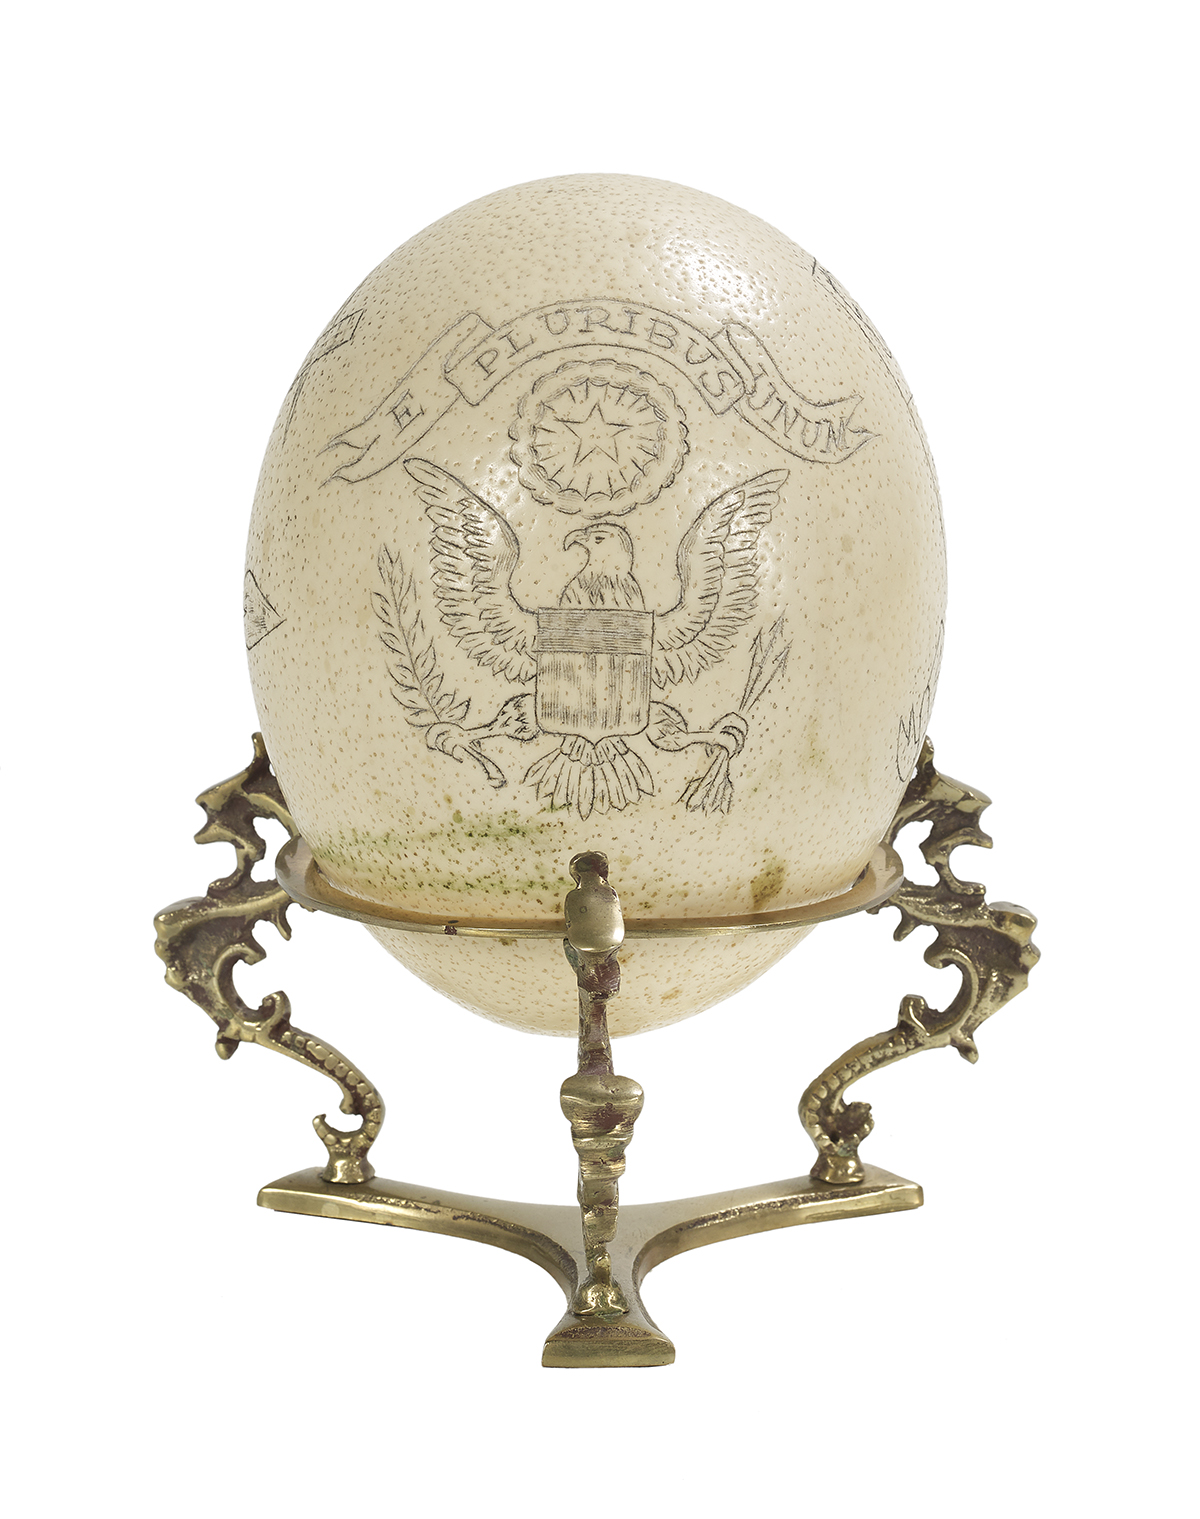 Engraved Ostrich Egg on Stand